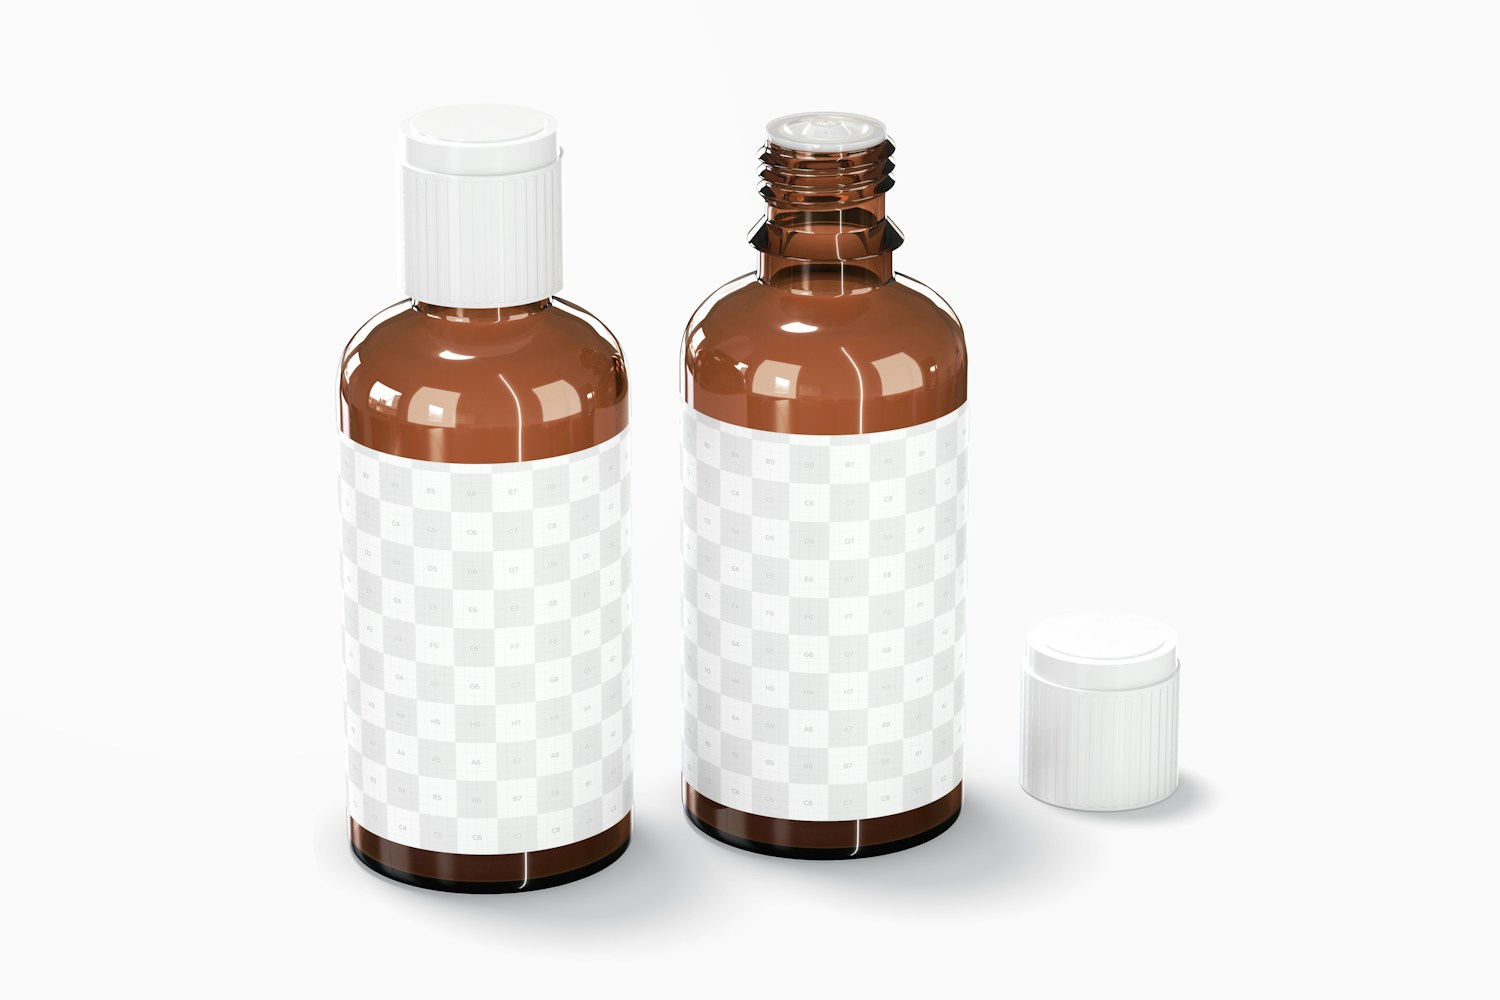 Euro Dropper Bottles with Orifice Reducers Mockup, Opened